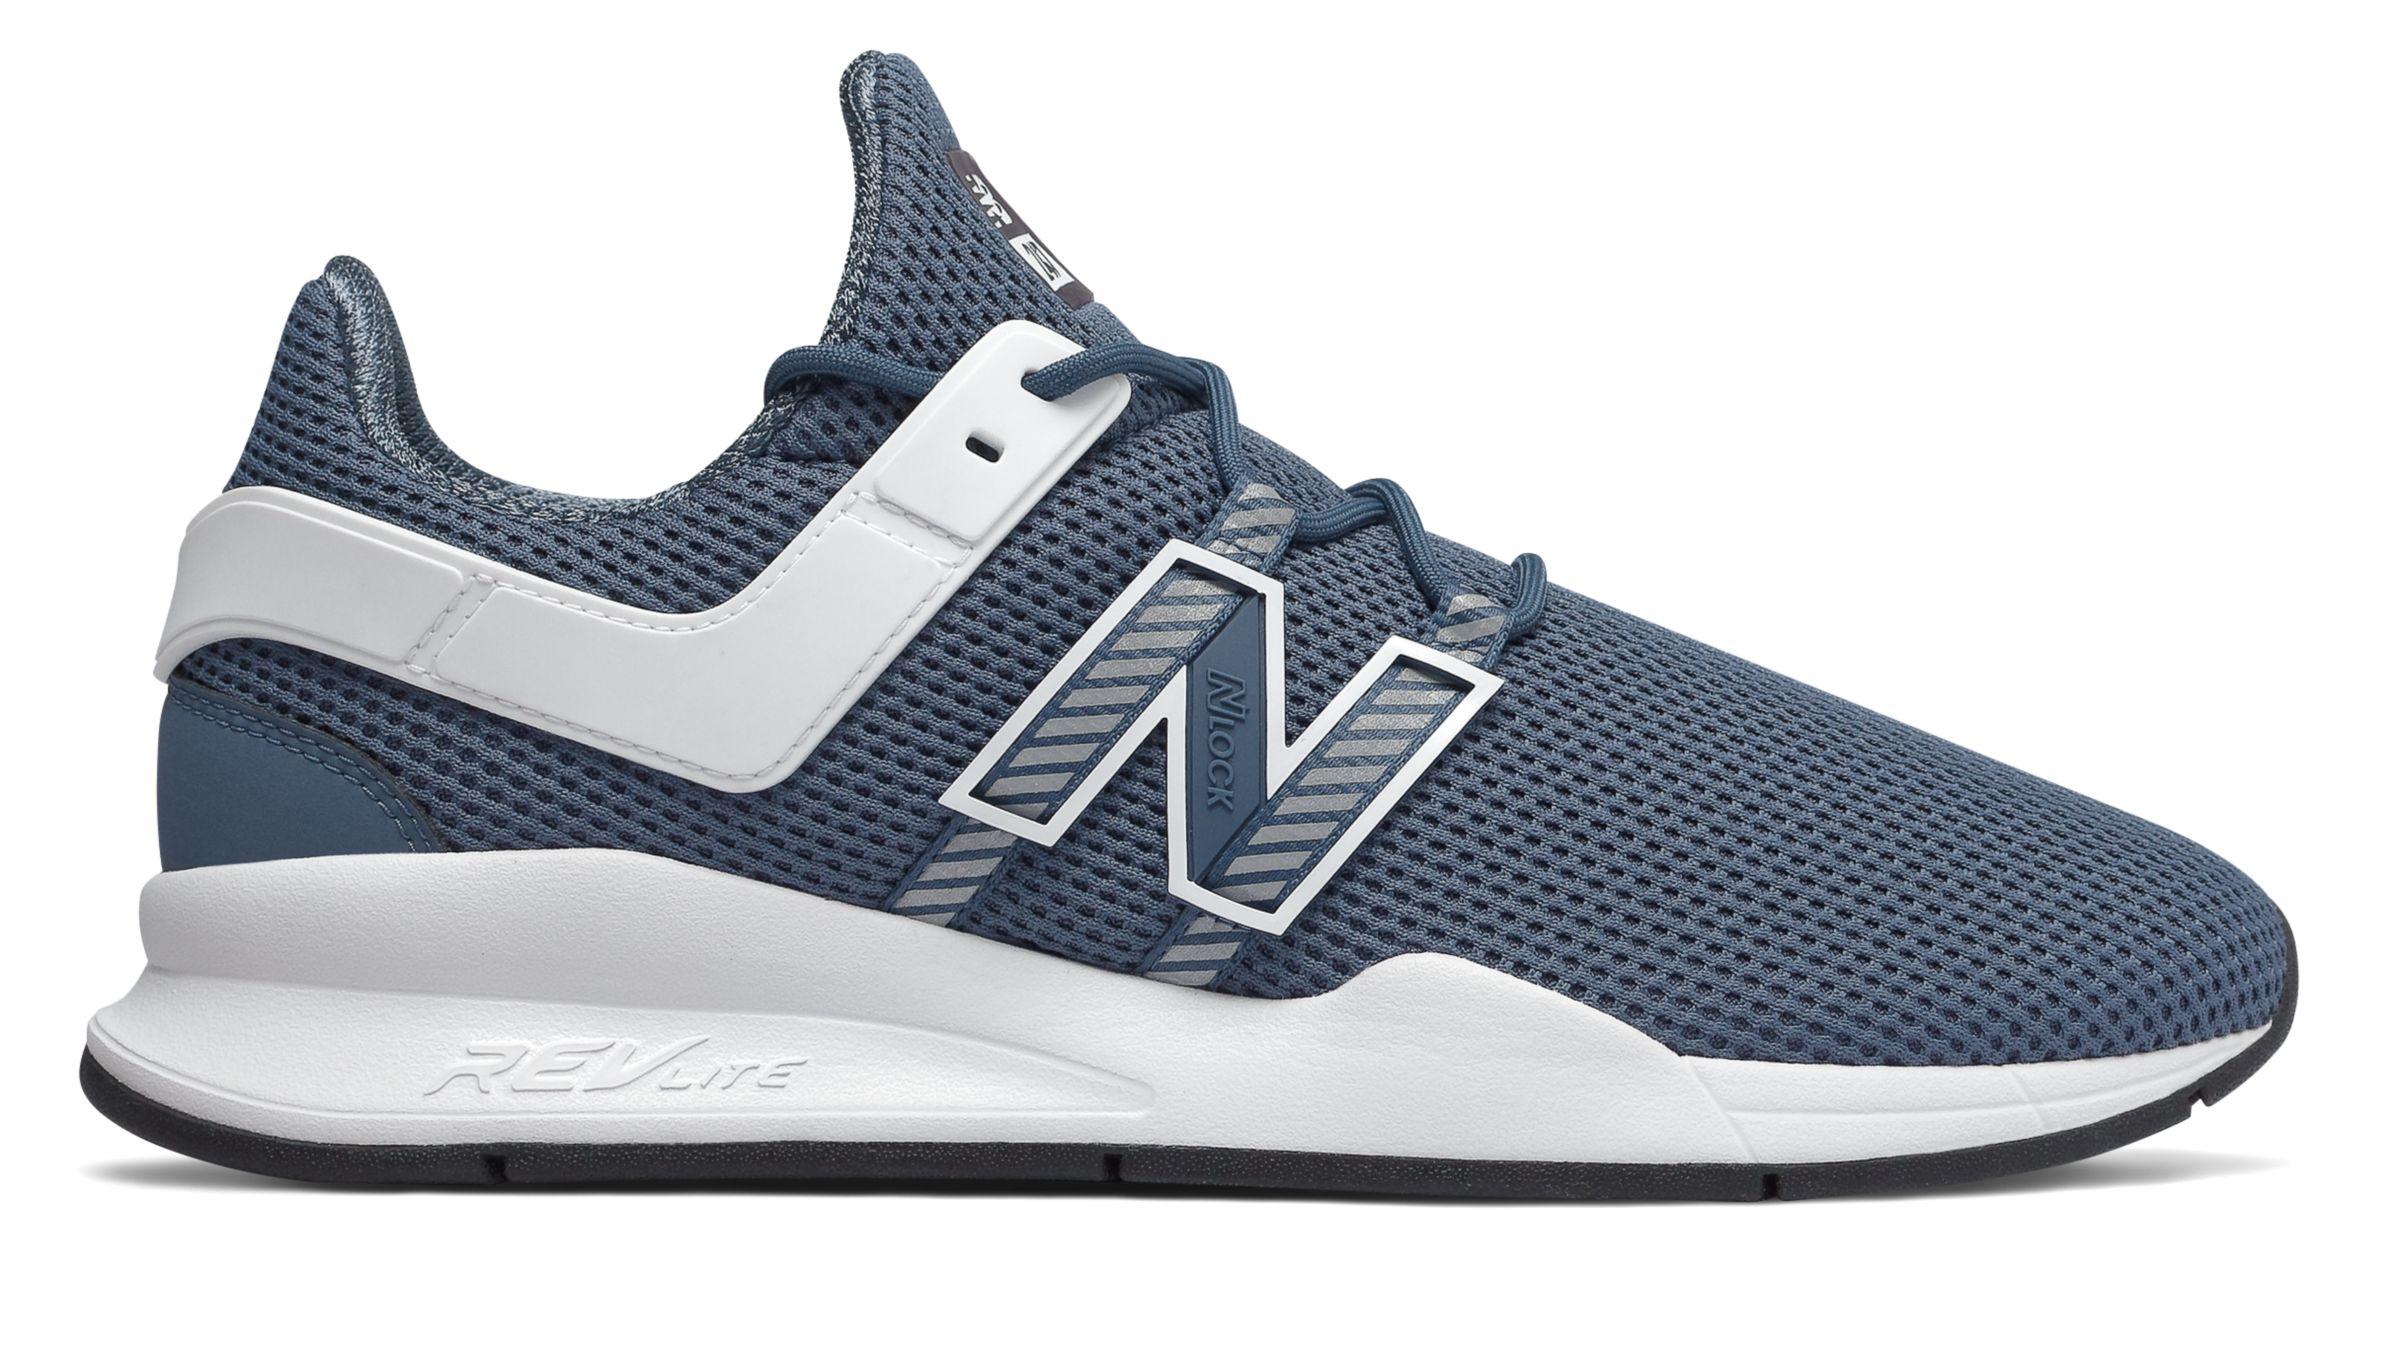 New Balance Synthetic 247v1 Deconstructed Sneaker in Vintage Indigo/White  (Blue) for Men - Save 61% - Lyst